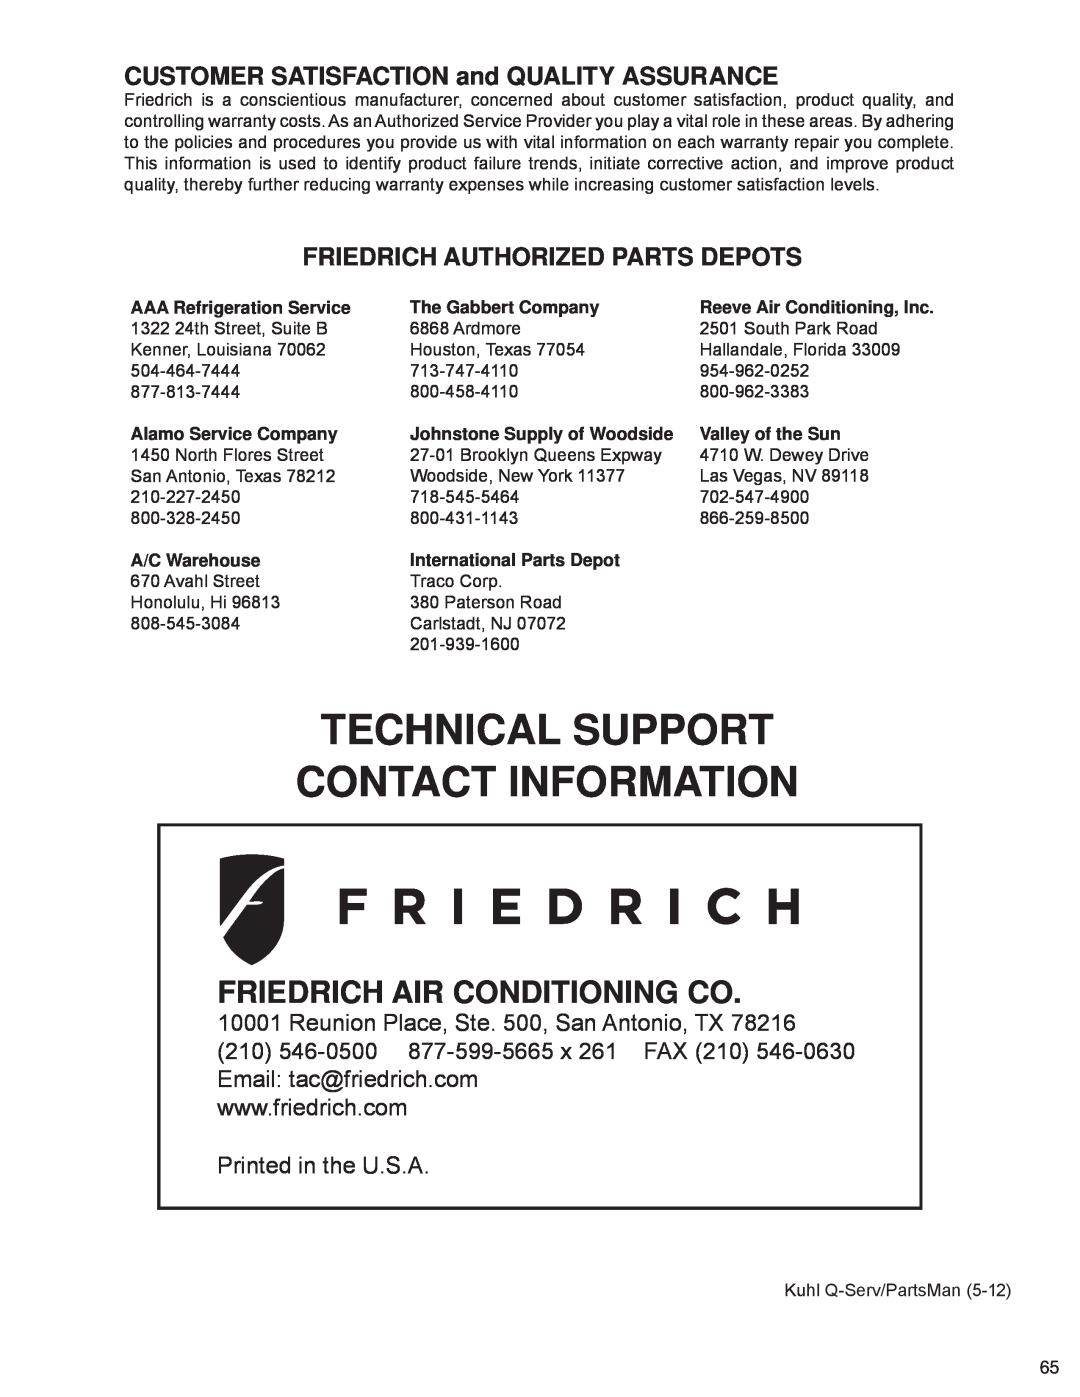 Friedrich SQ08N10 CUSTOMER SATISFACTION and QUALITY ASSURANCE, Friedrich Authorized Parts Depots, AAARefrigeration Service 